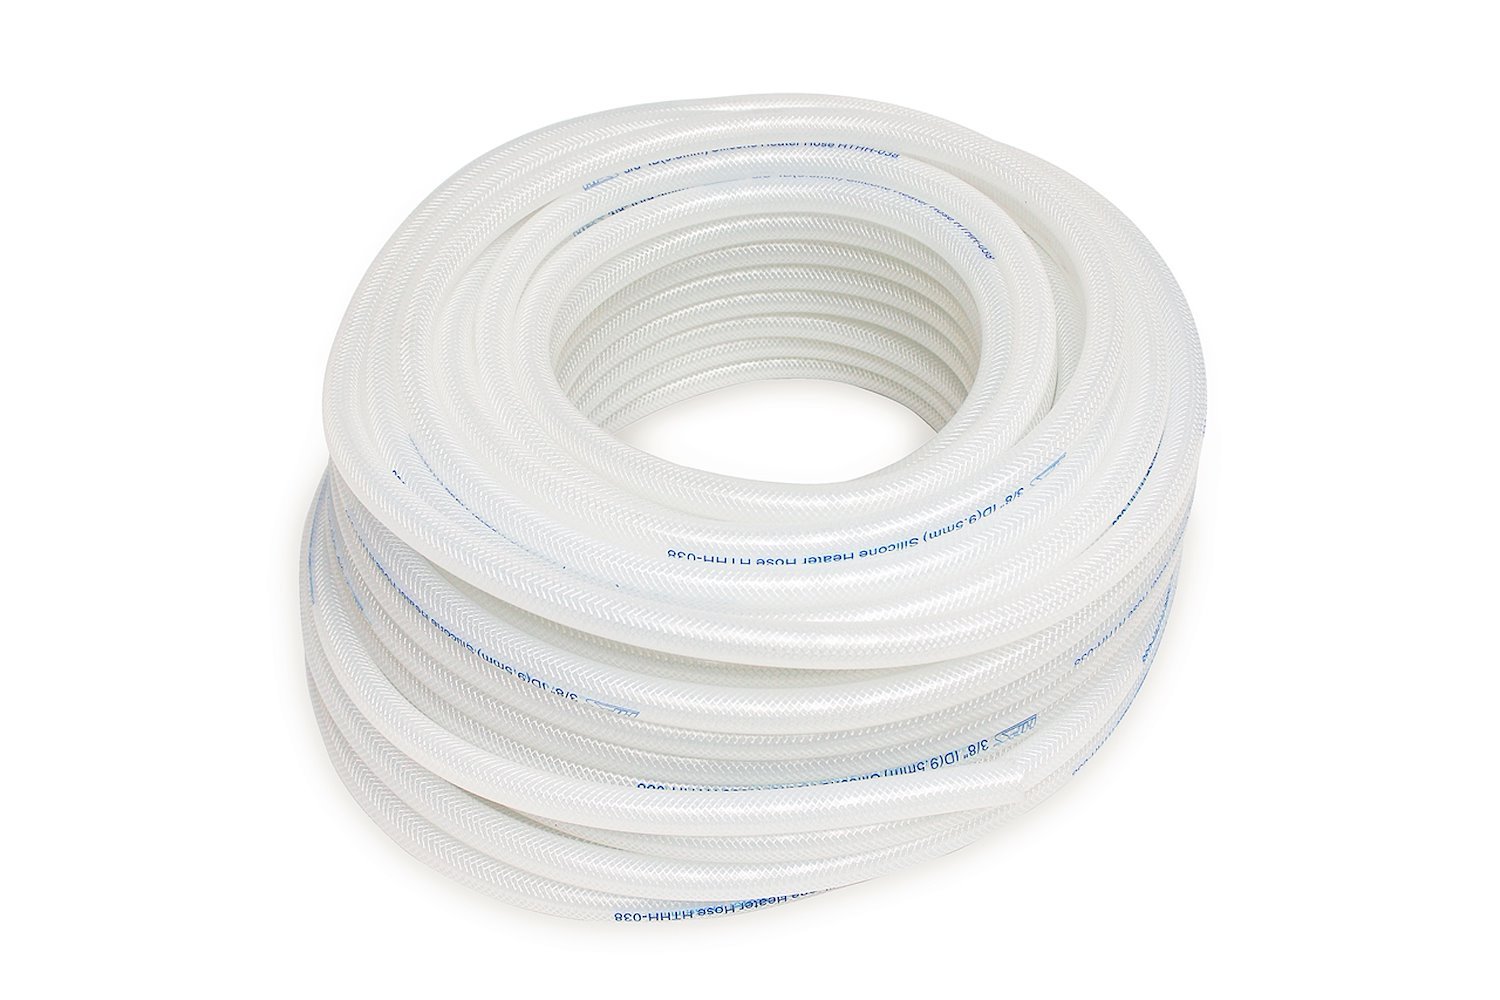 HTHH-062-CLEARx25 Silicone Heater Hose Tubing, High-Temp Reinforced, 5/8 in. ID, 25 ft. Roll, Clear